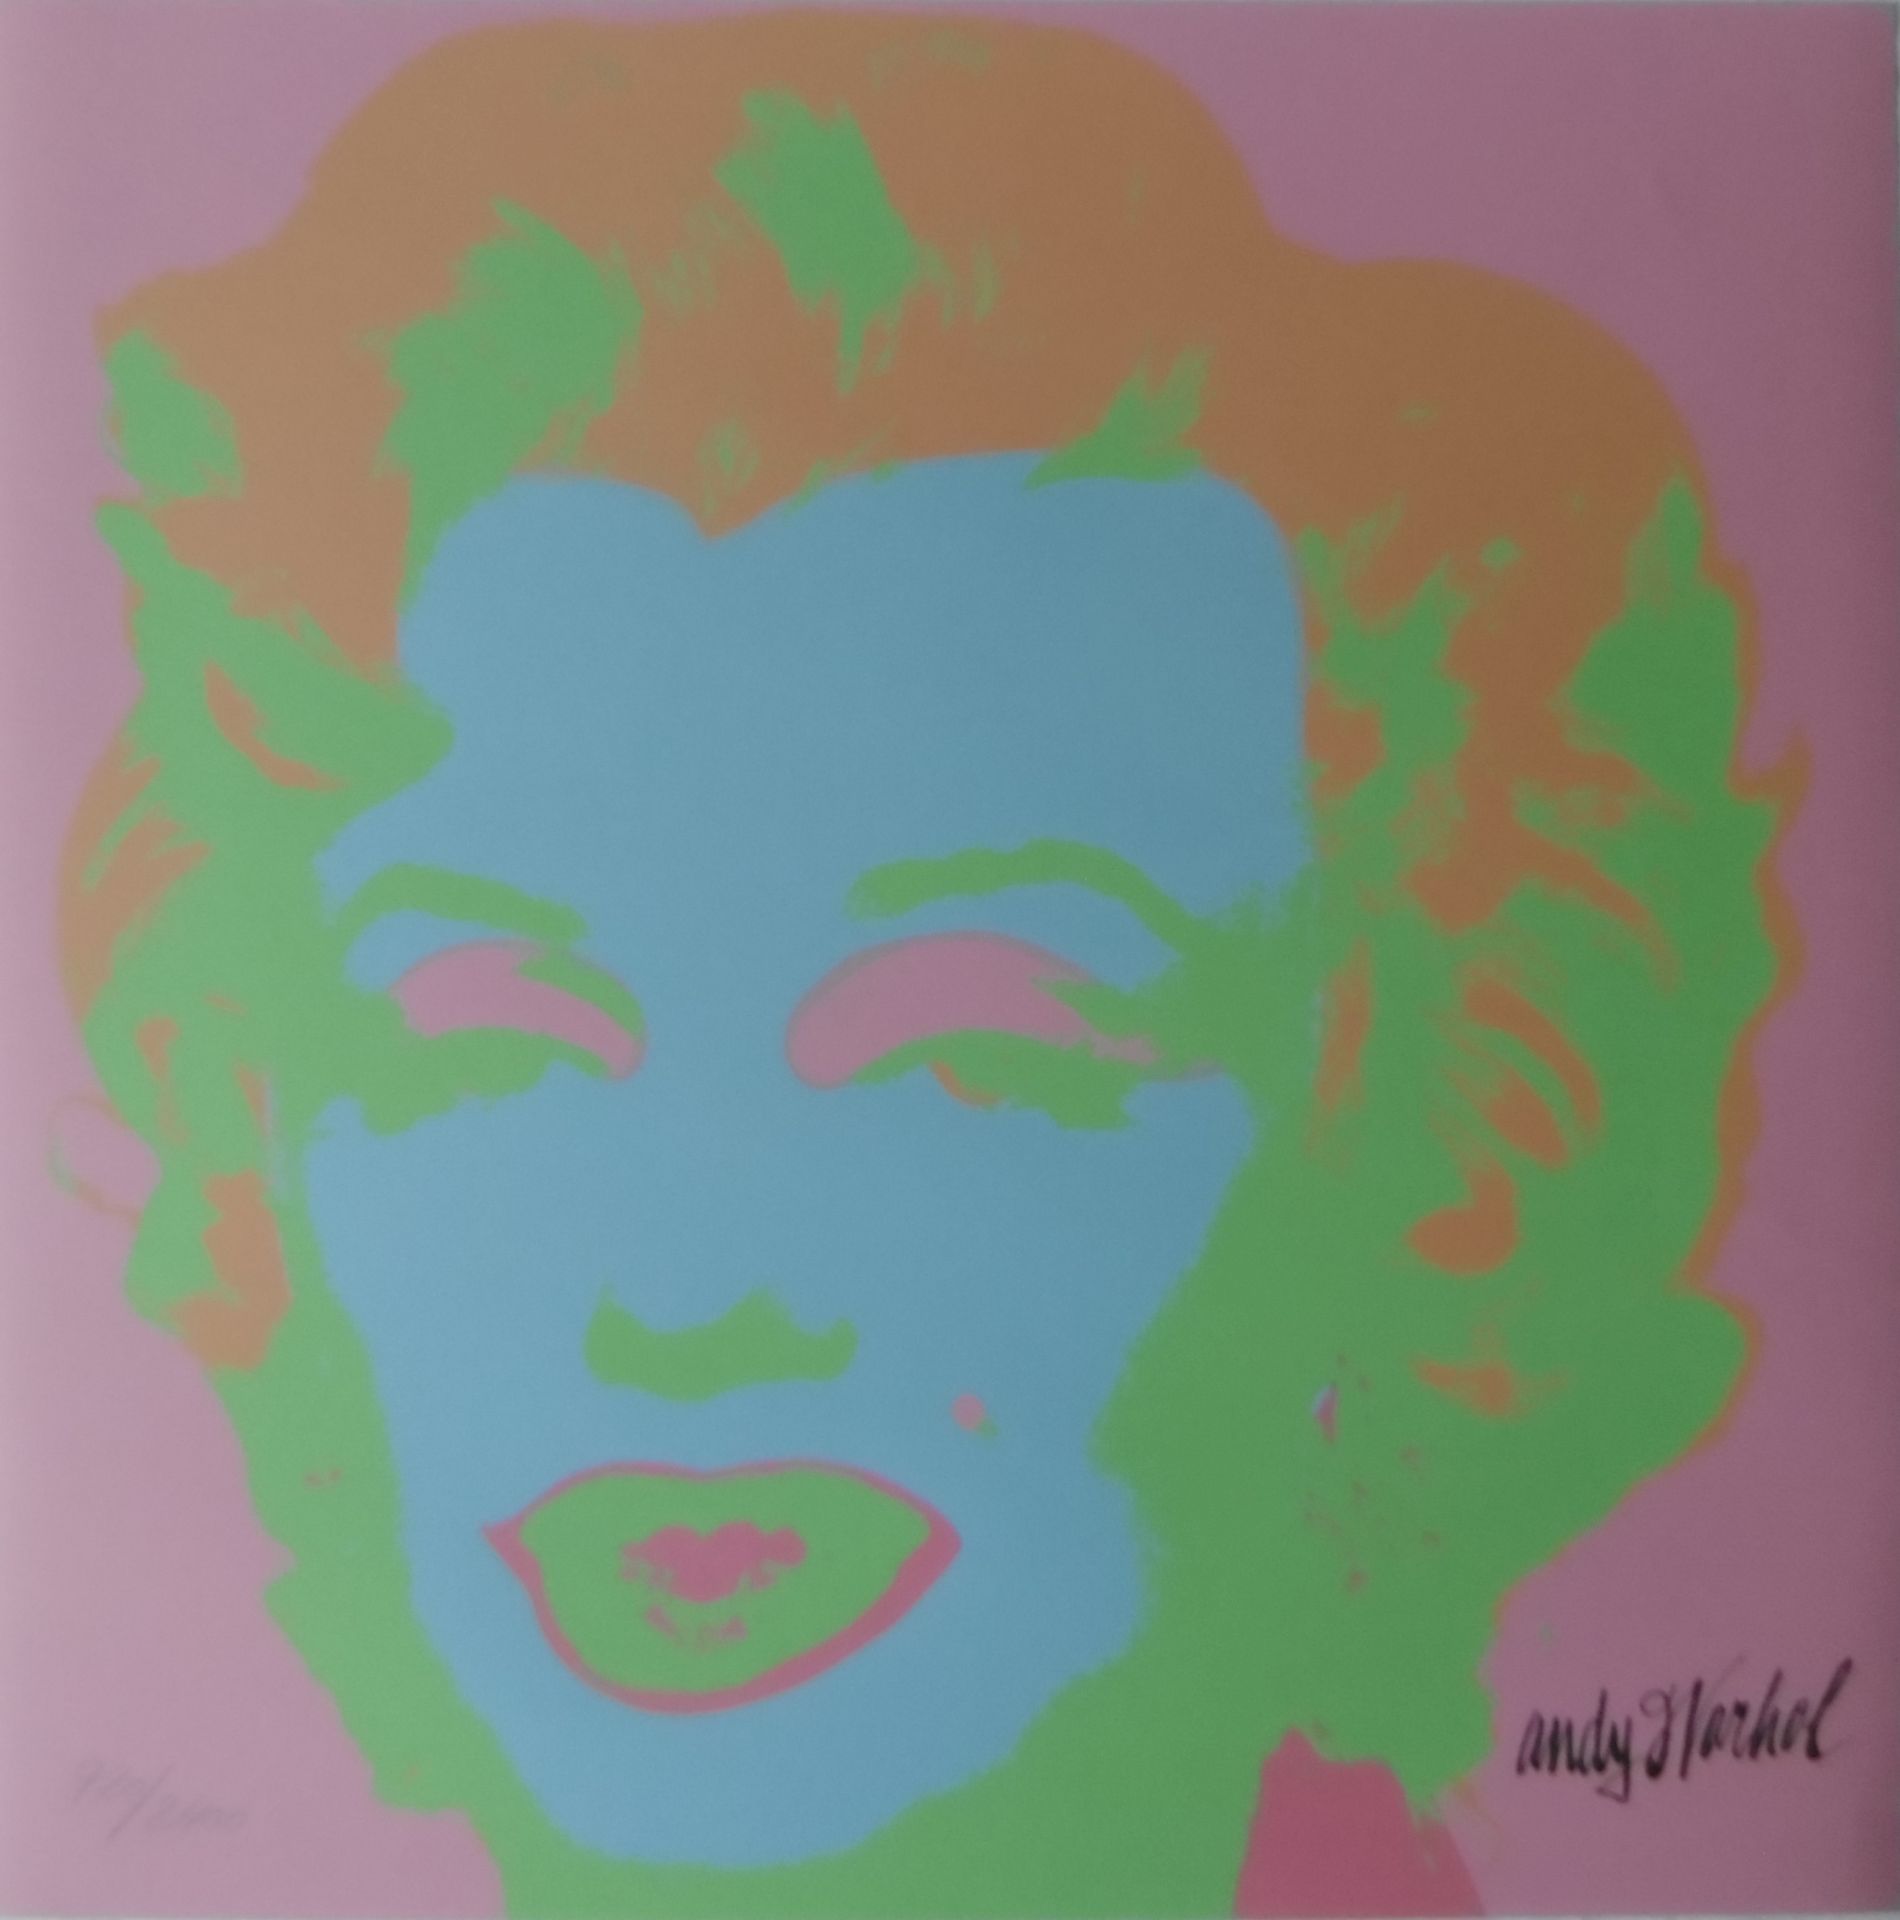 Andy WARHOL (after) Marilyn Monroe (1967) Pink and Blue Lithograph after the work [...]